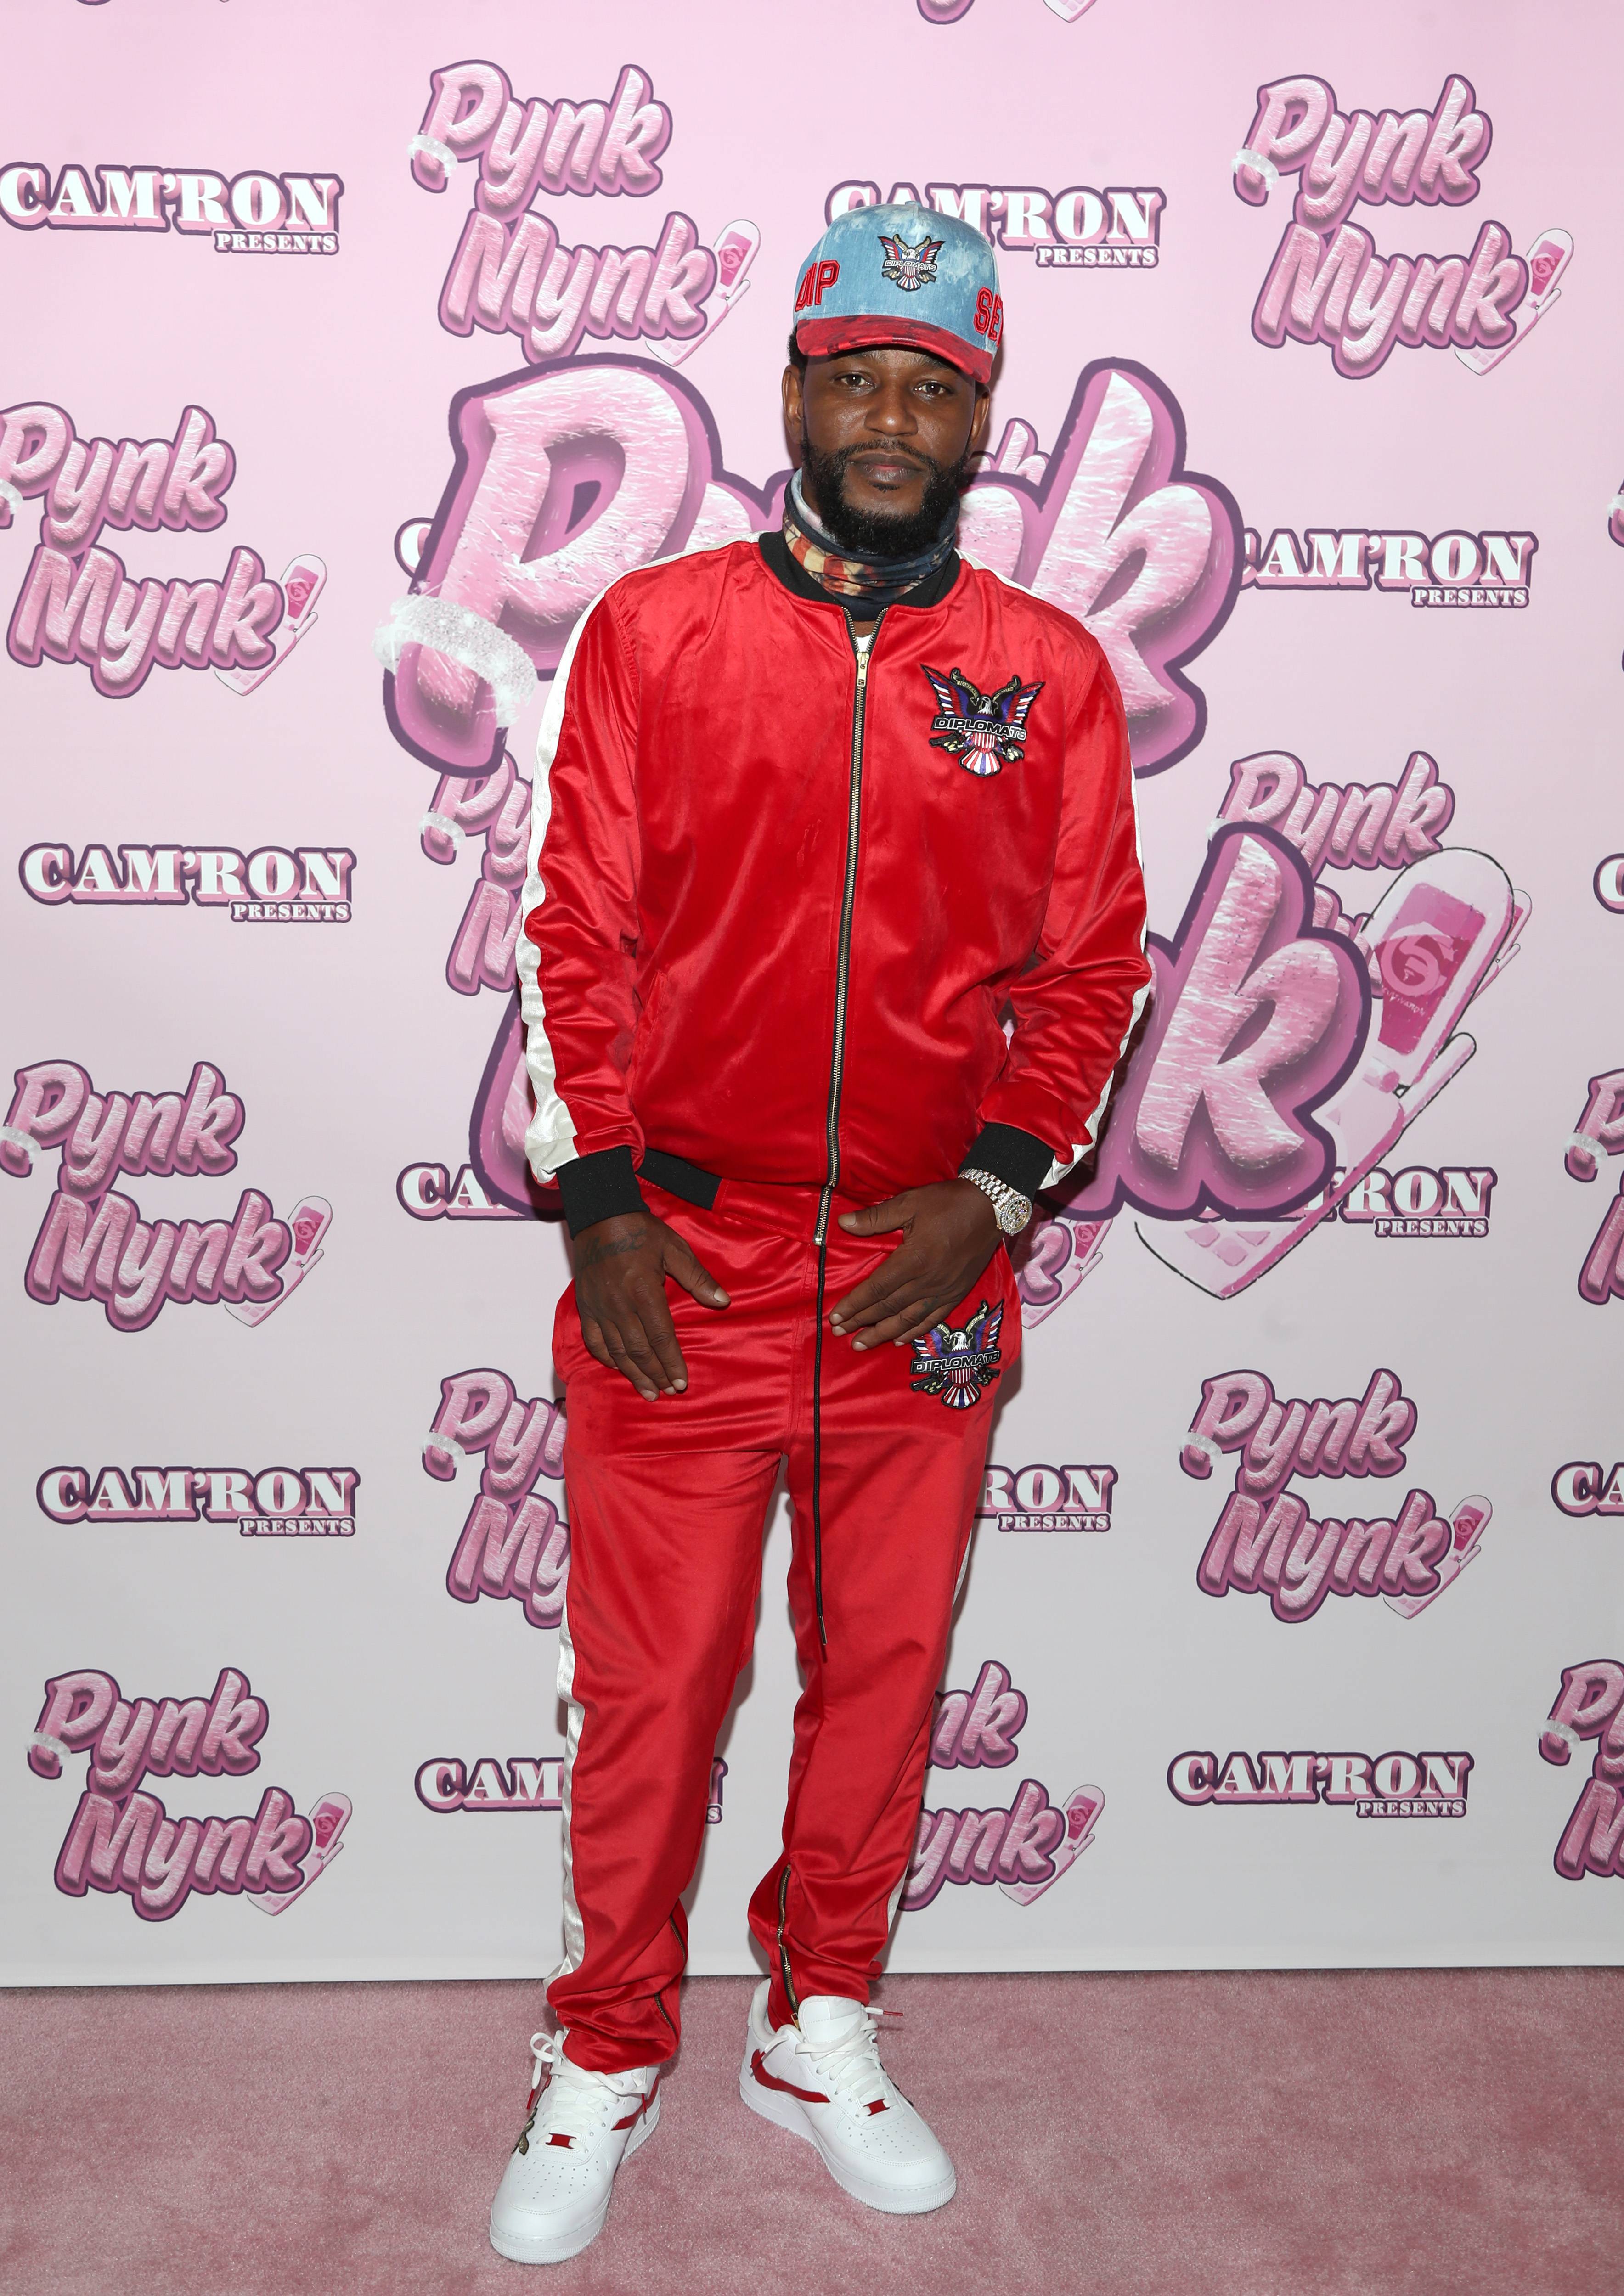 PERRIS, CALIFORNIA - OCTOBER 21: Rapper Cam'ron attends Cam'ron's Pynk Mynk Unveiling at Strains on October 21, 2020 in Perris, California. (Photo by Jerritt Clark/Getty Images for Echoing Soundz)